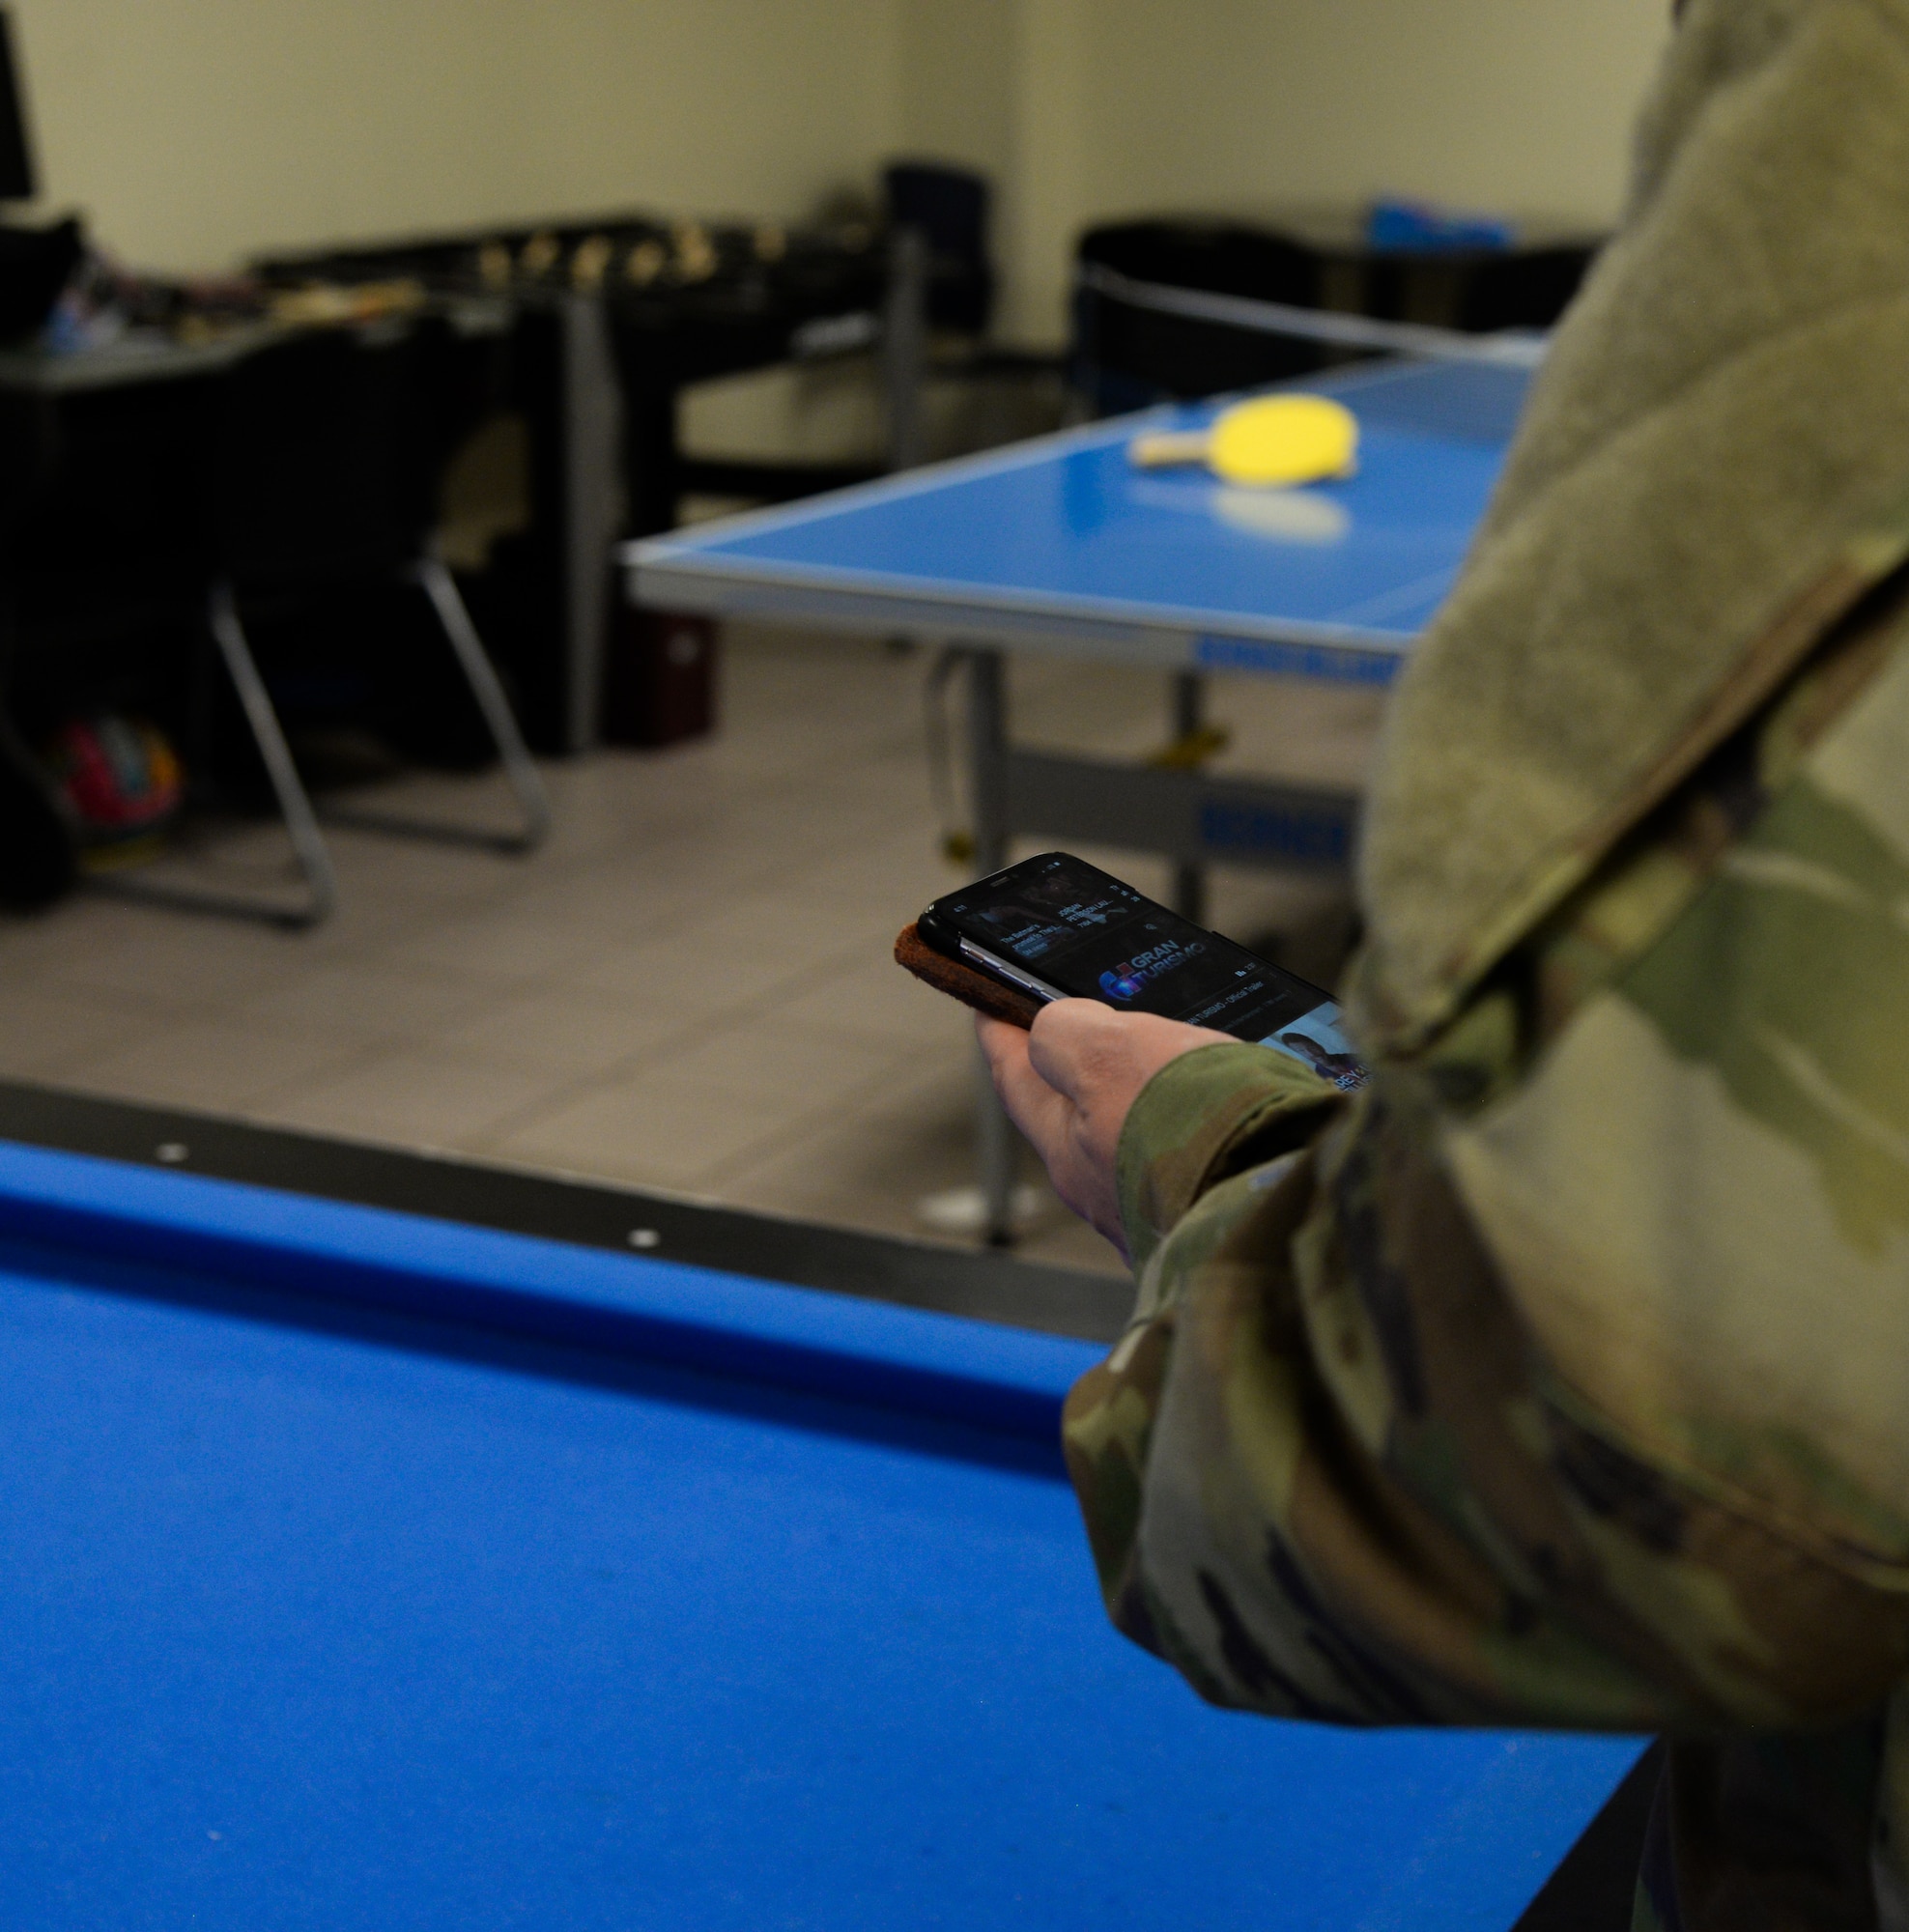 Airman using personal device to access a website in break area